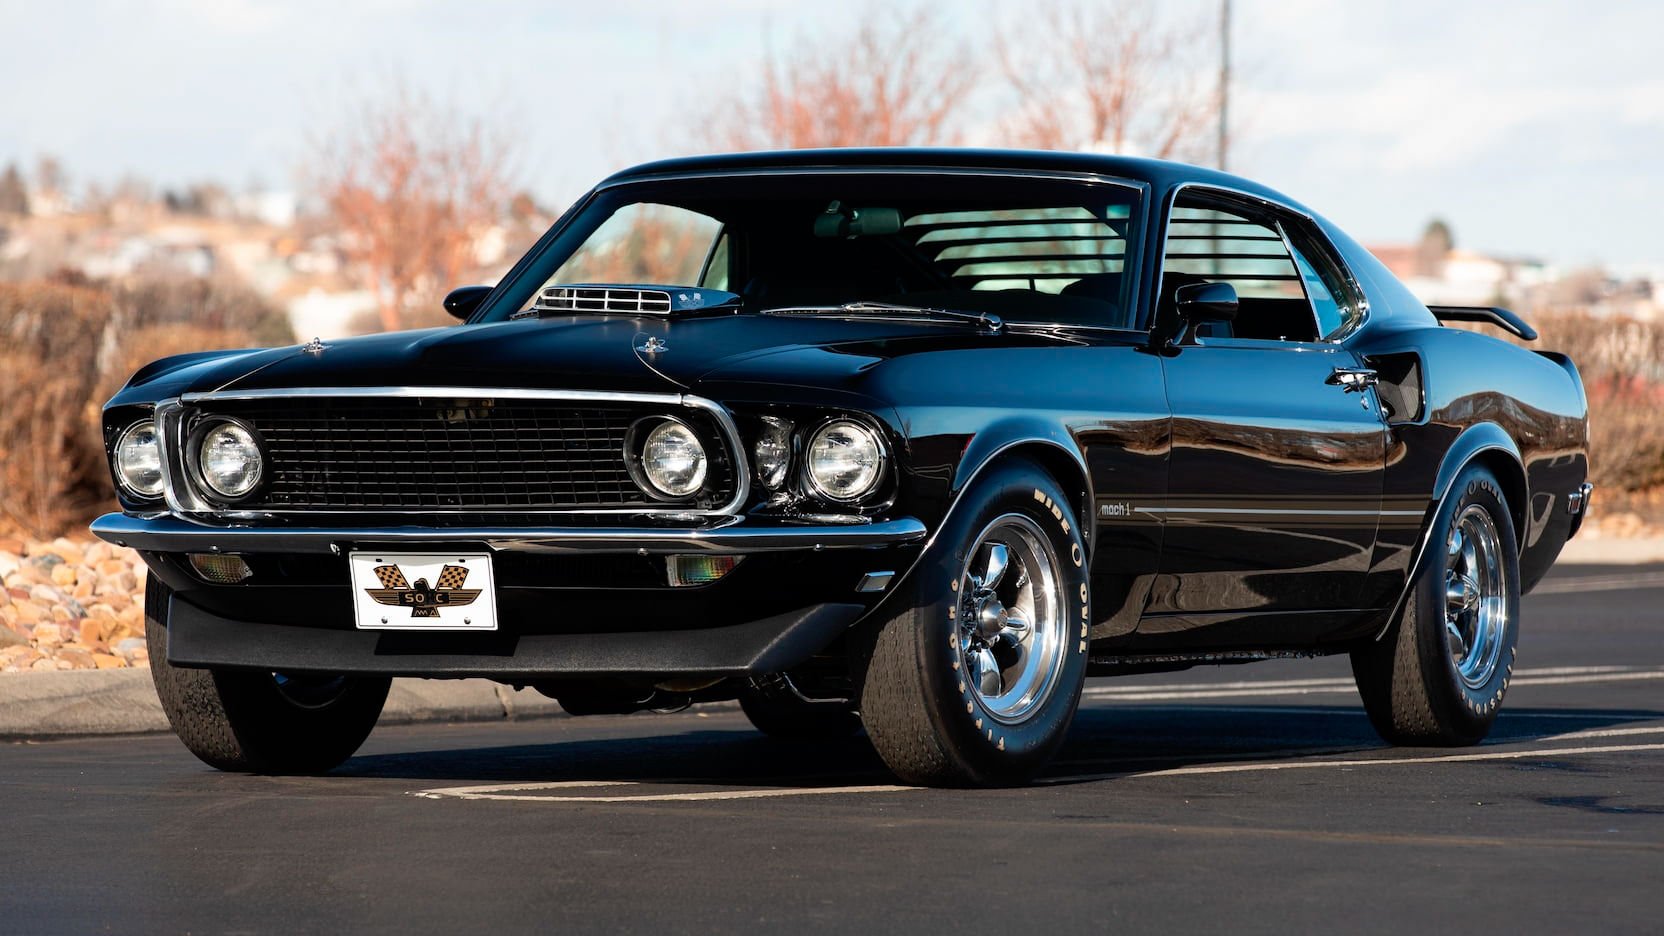 Ford Mustang Mach 1 Cammer V8